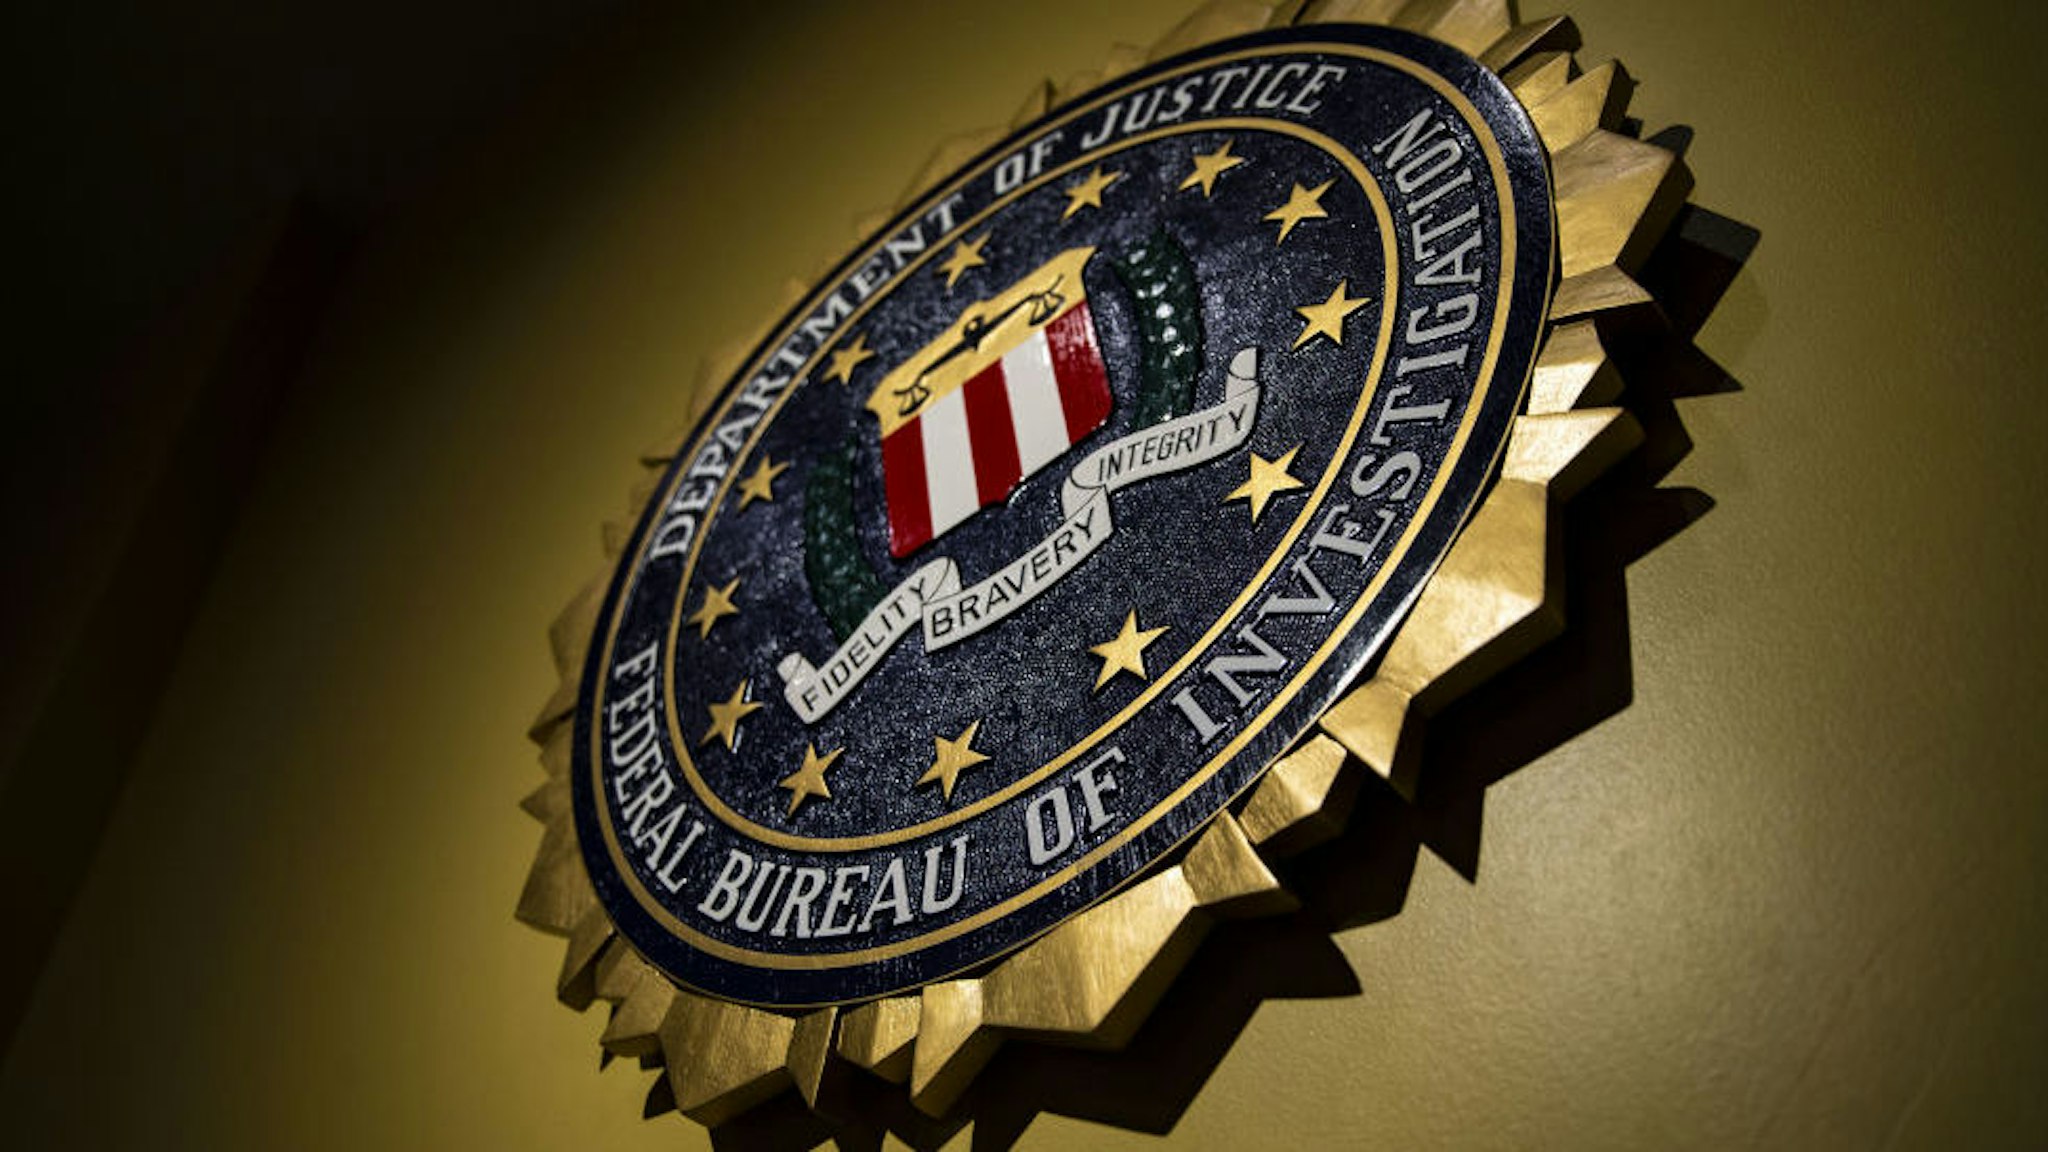 The seal of the Federal Bureau of Investigation (FBI) hangs on a wall before a news conference at the FBI headquarters in Washington, D.C., U.S., on Thursday, June 14, 2018.